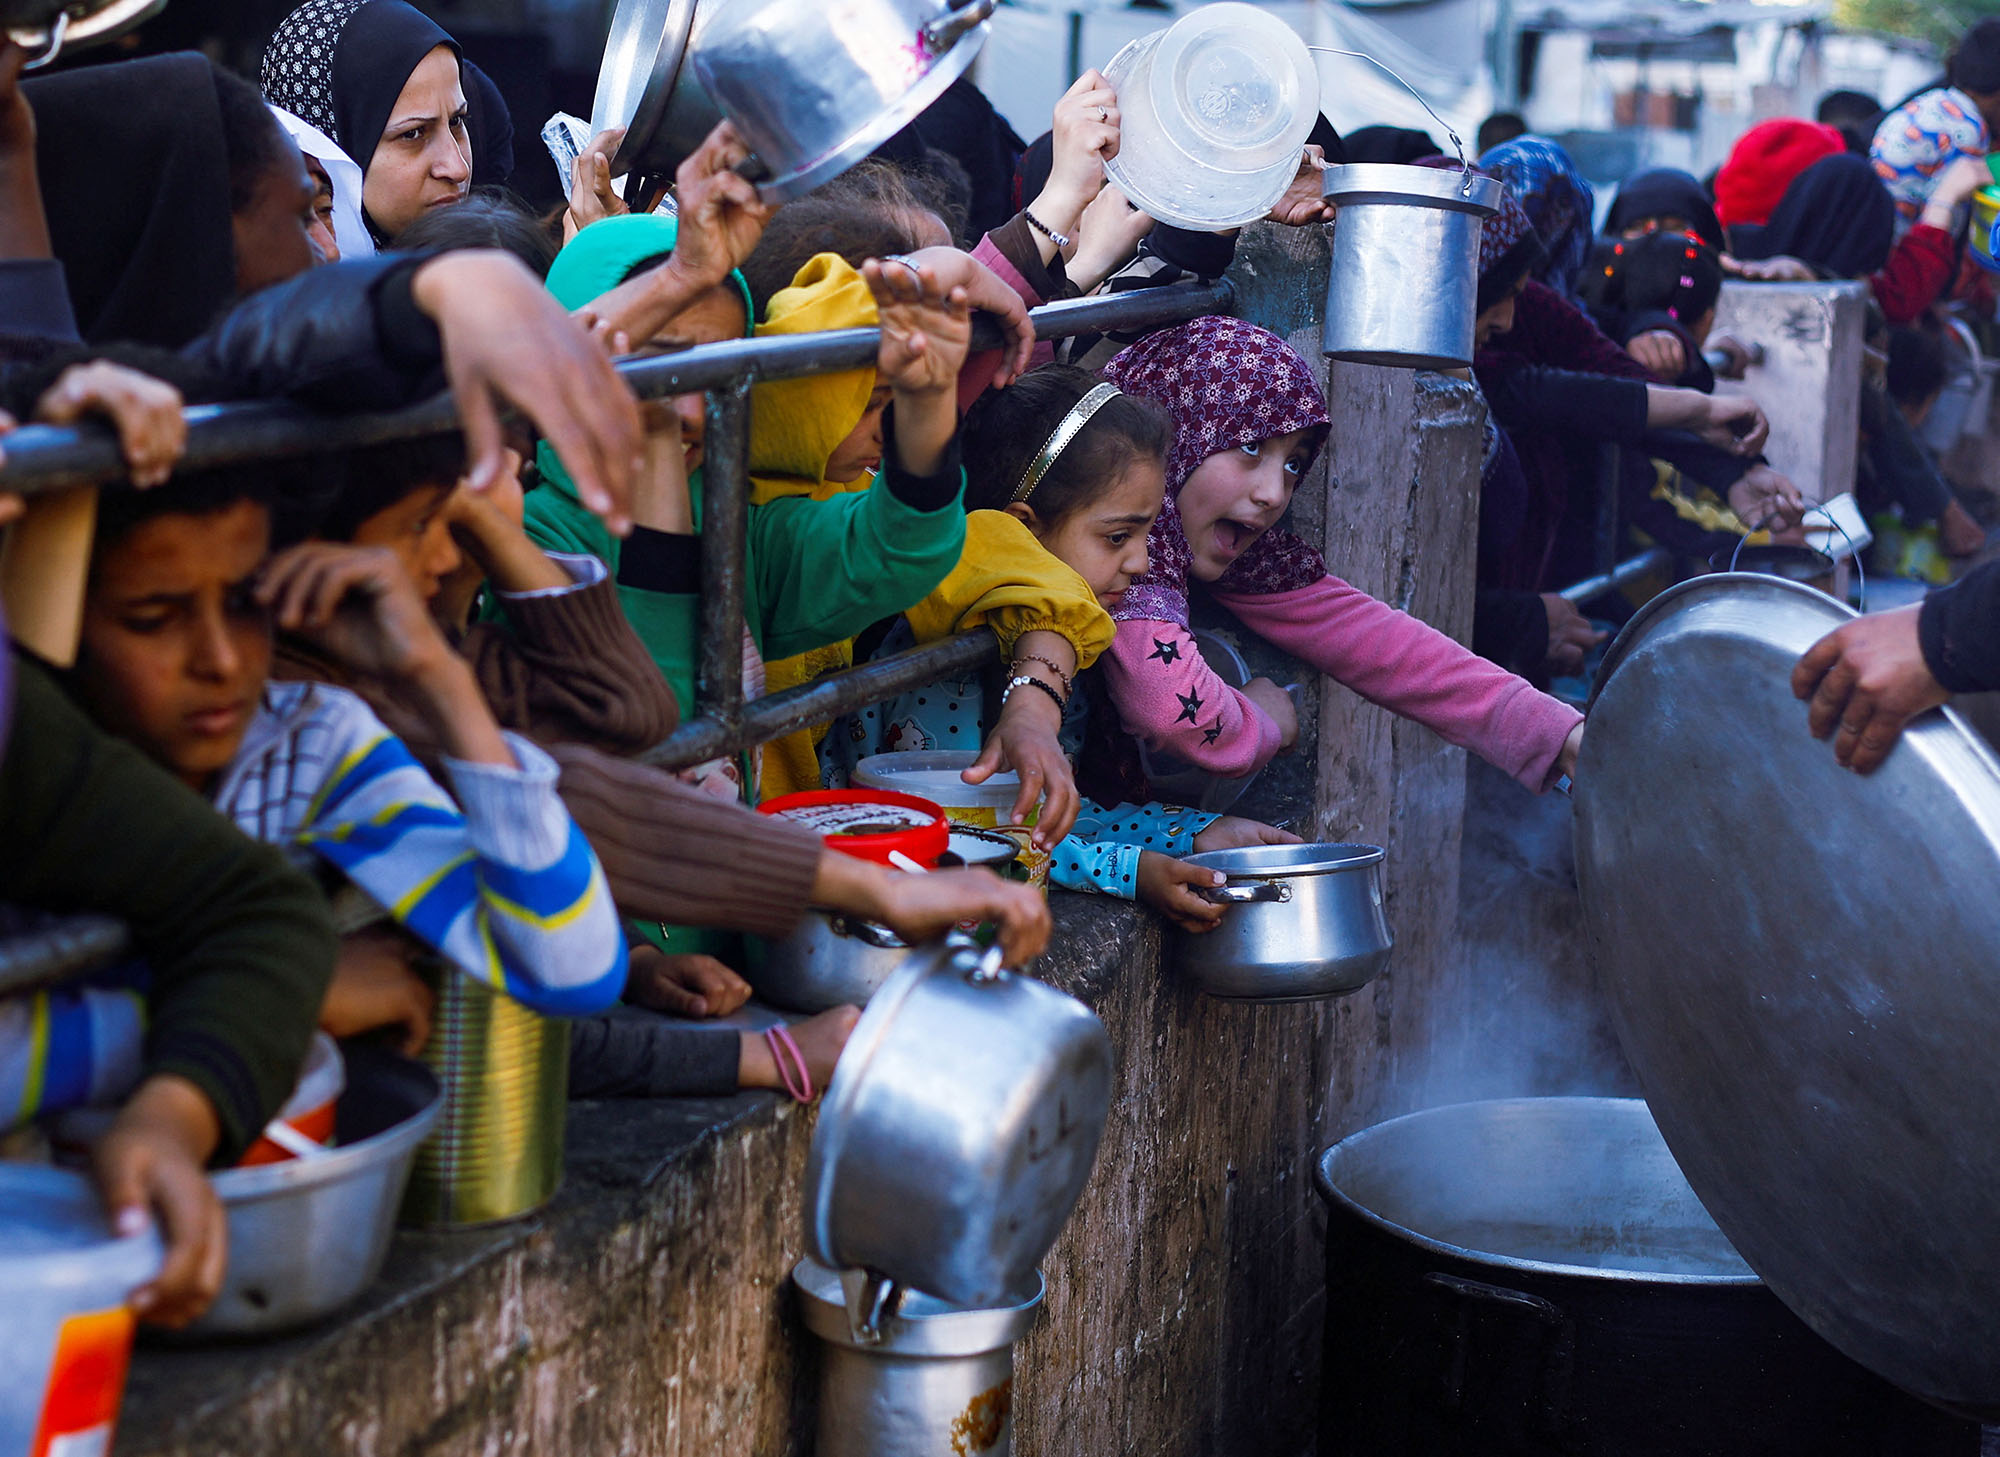 Palestinian children wait to receive food in Gaza on March 13.